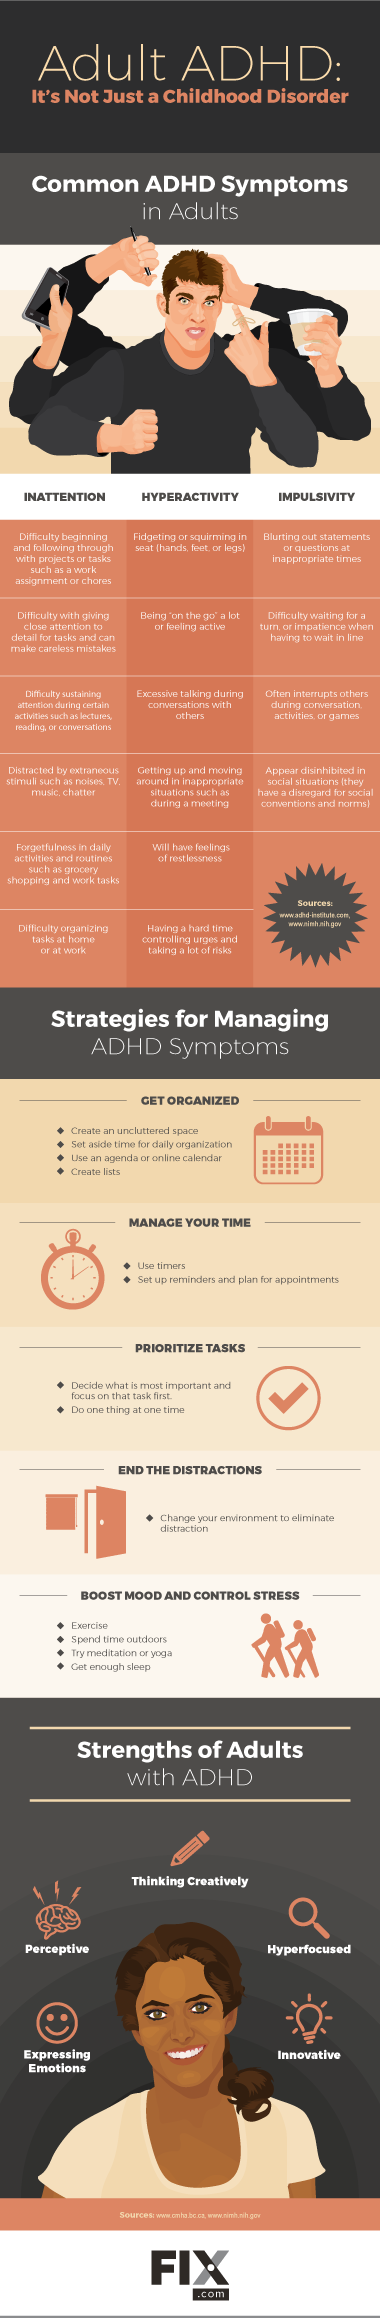 Can't Get Anything Done? Feng Shui for Adult ADHD Helps You Accomplish More